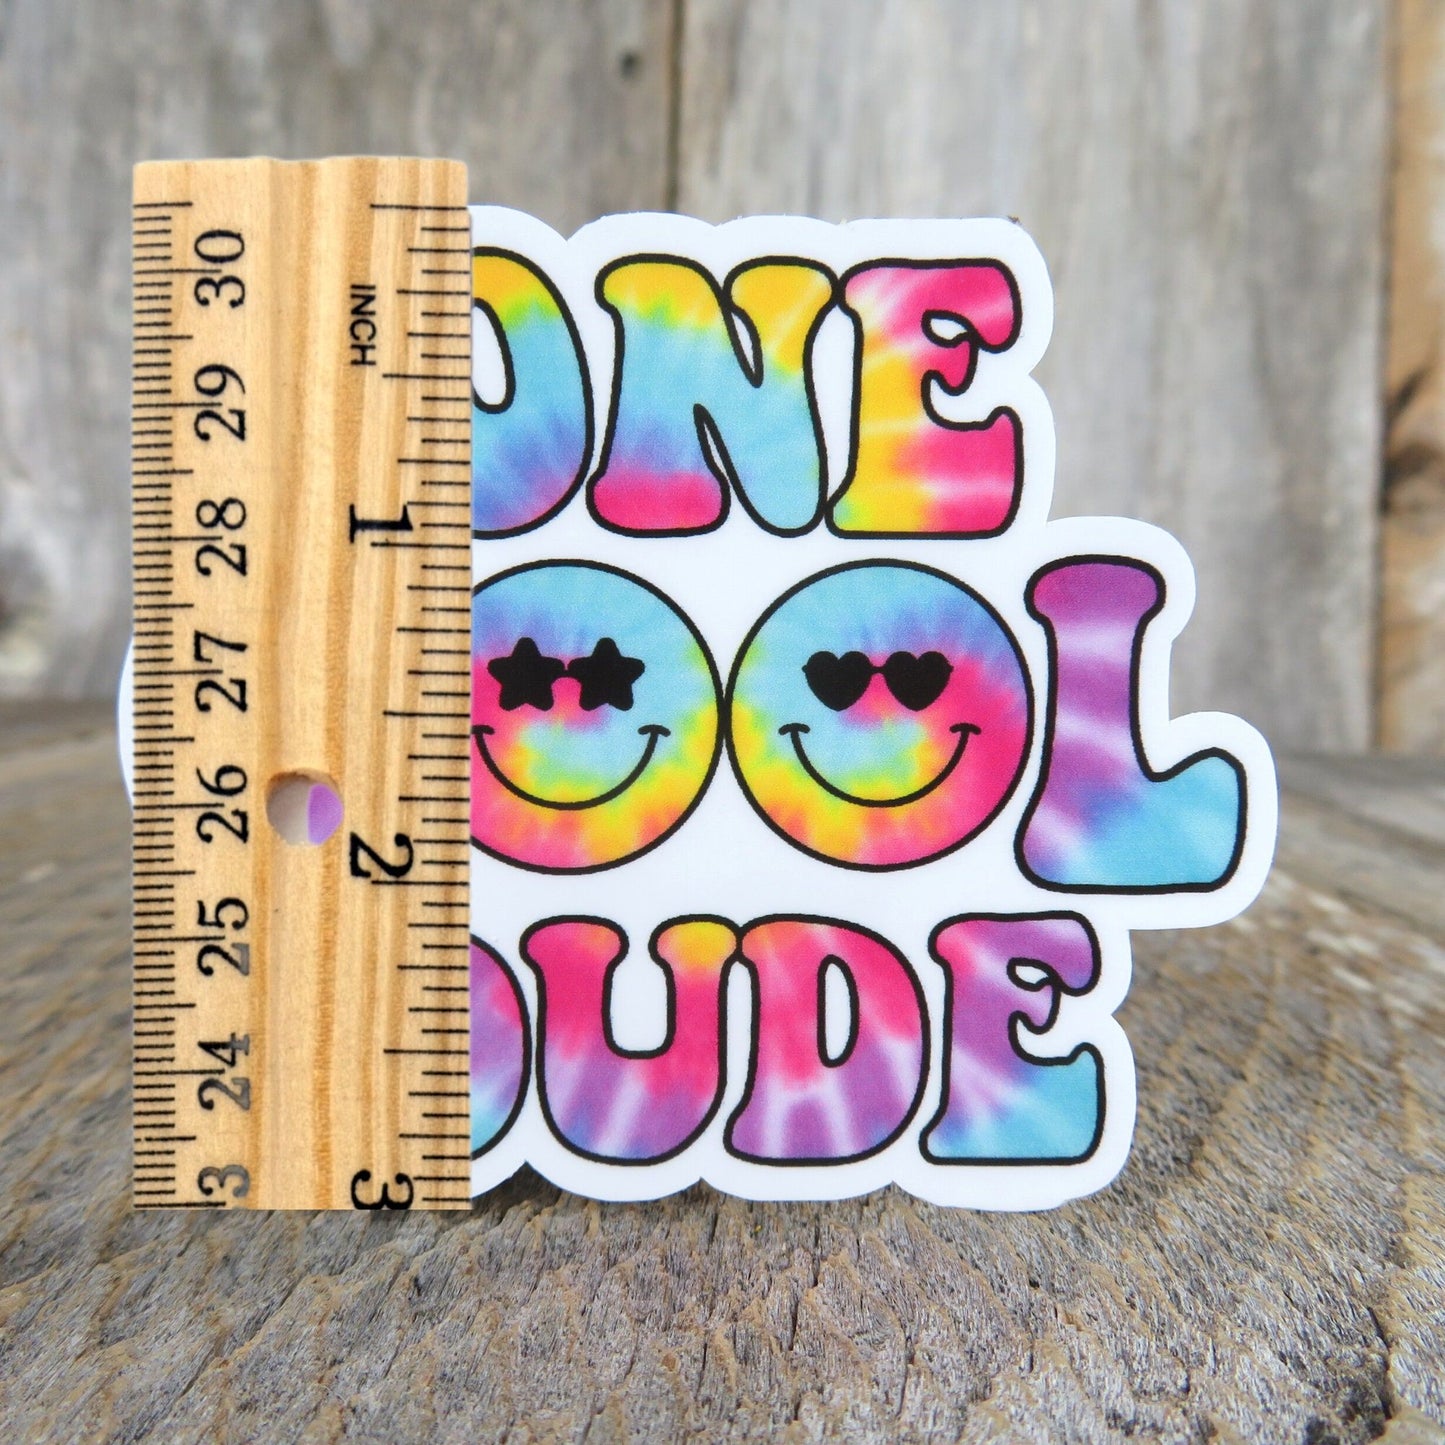 One Cool Dude Sticker Happy Full Color Positive Saying Tie Dye Water Bottle